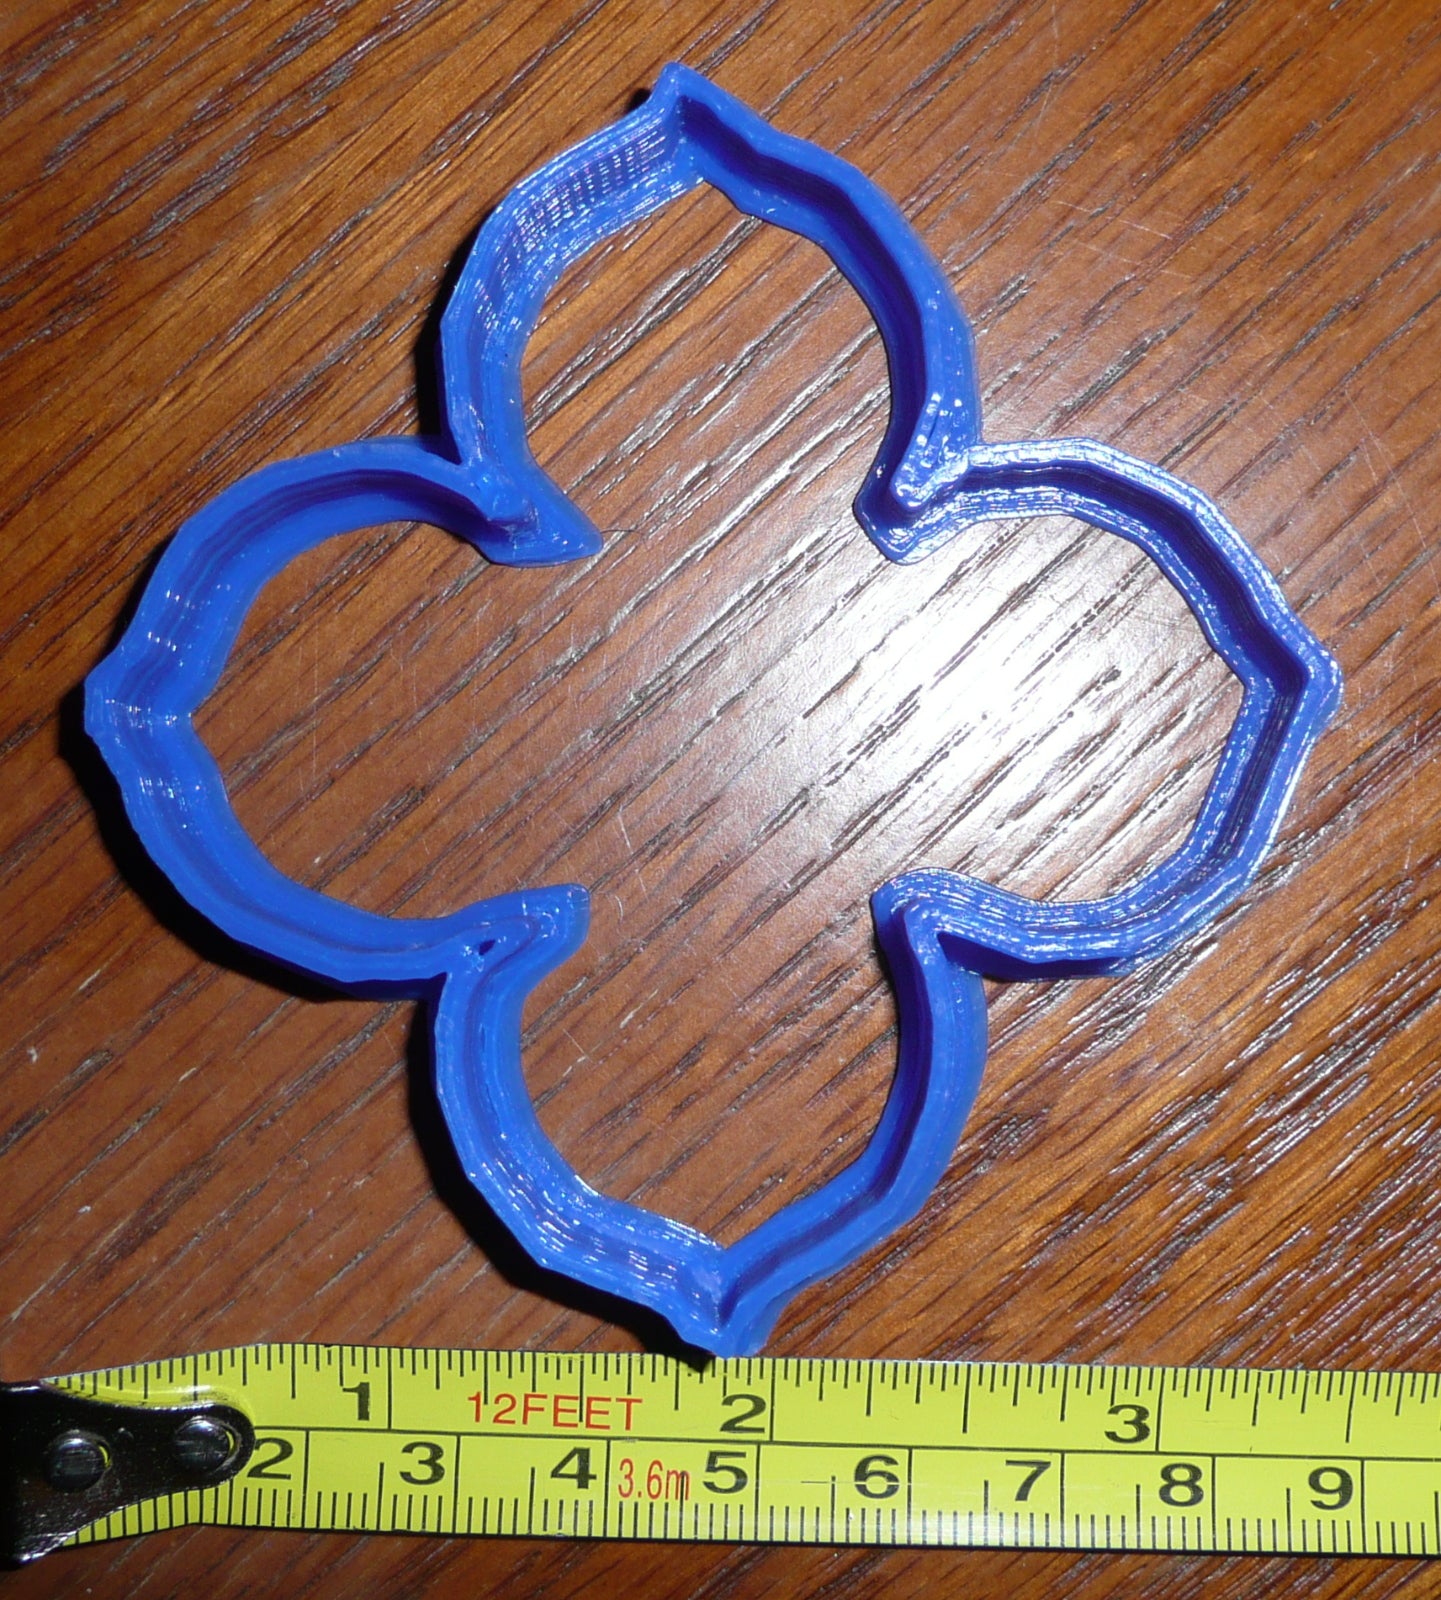 Hydrangea Flower Cookie Cutter Baking Tool Special Occasion Made In USA PR298